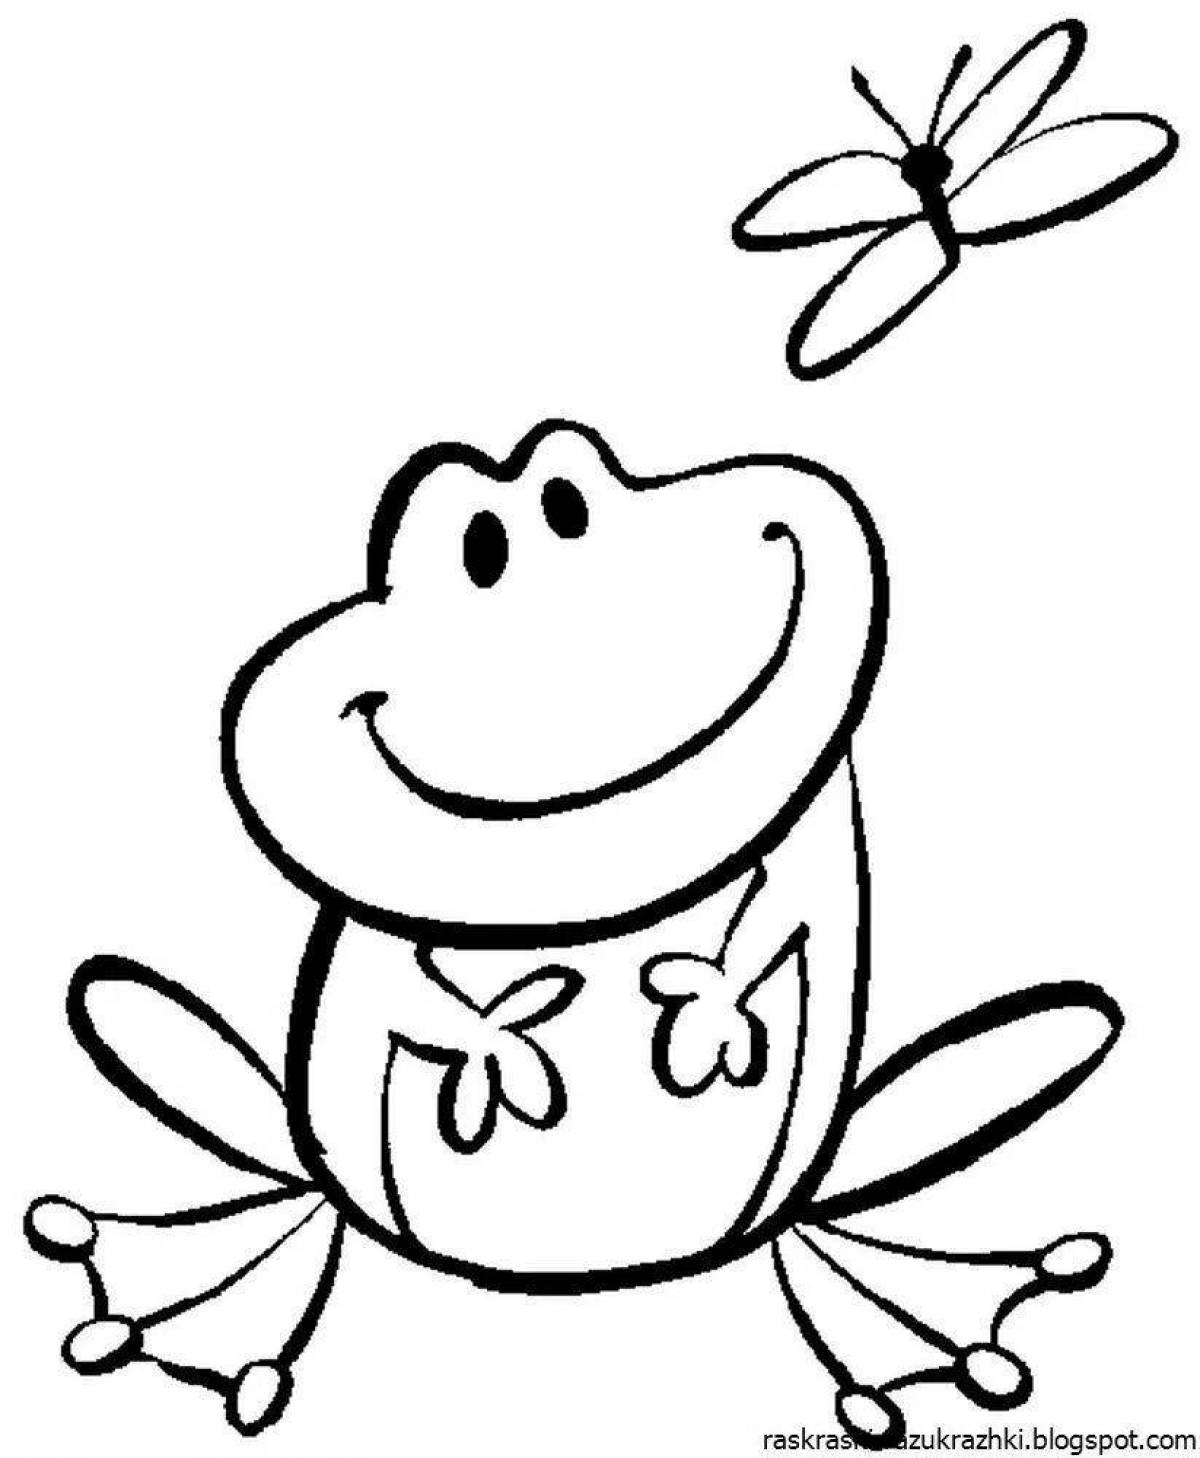 A fun frog coloring book for kids 4-5 years old